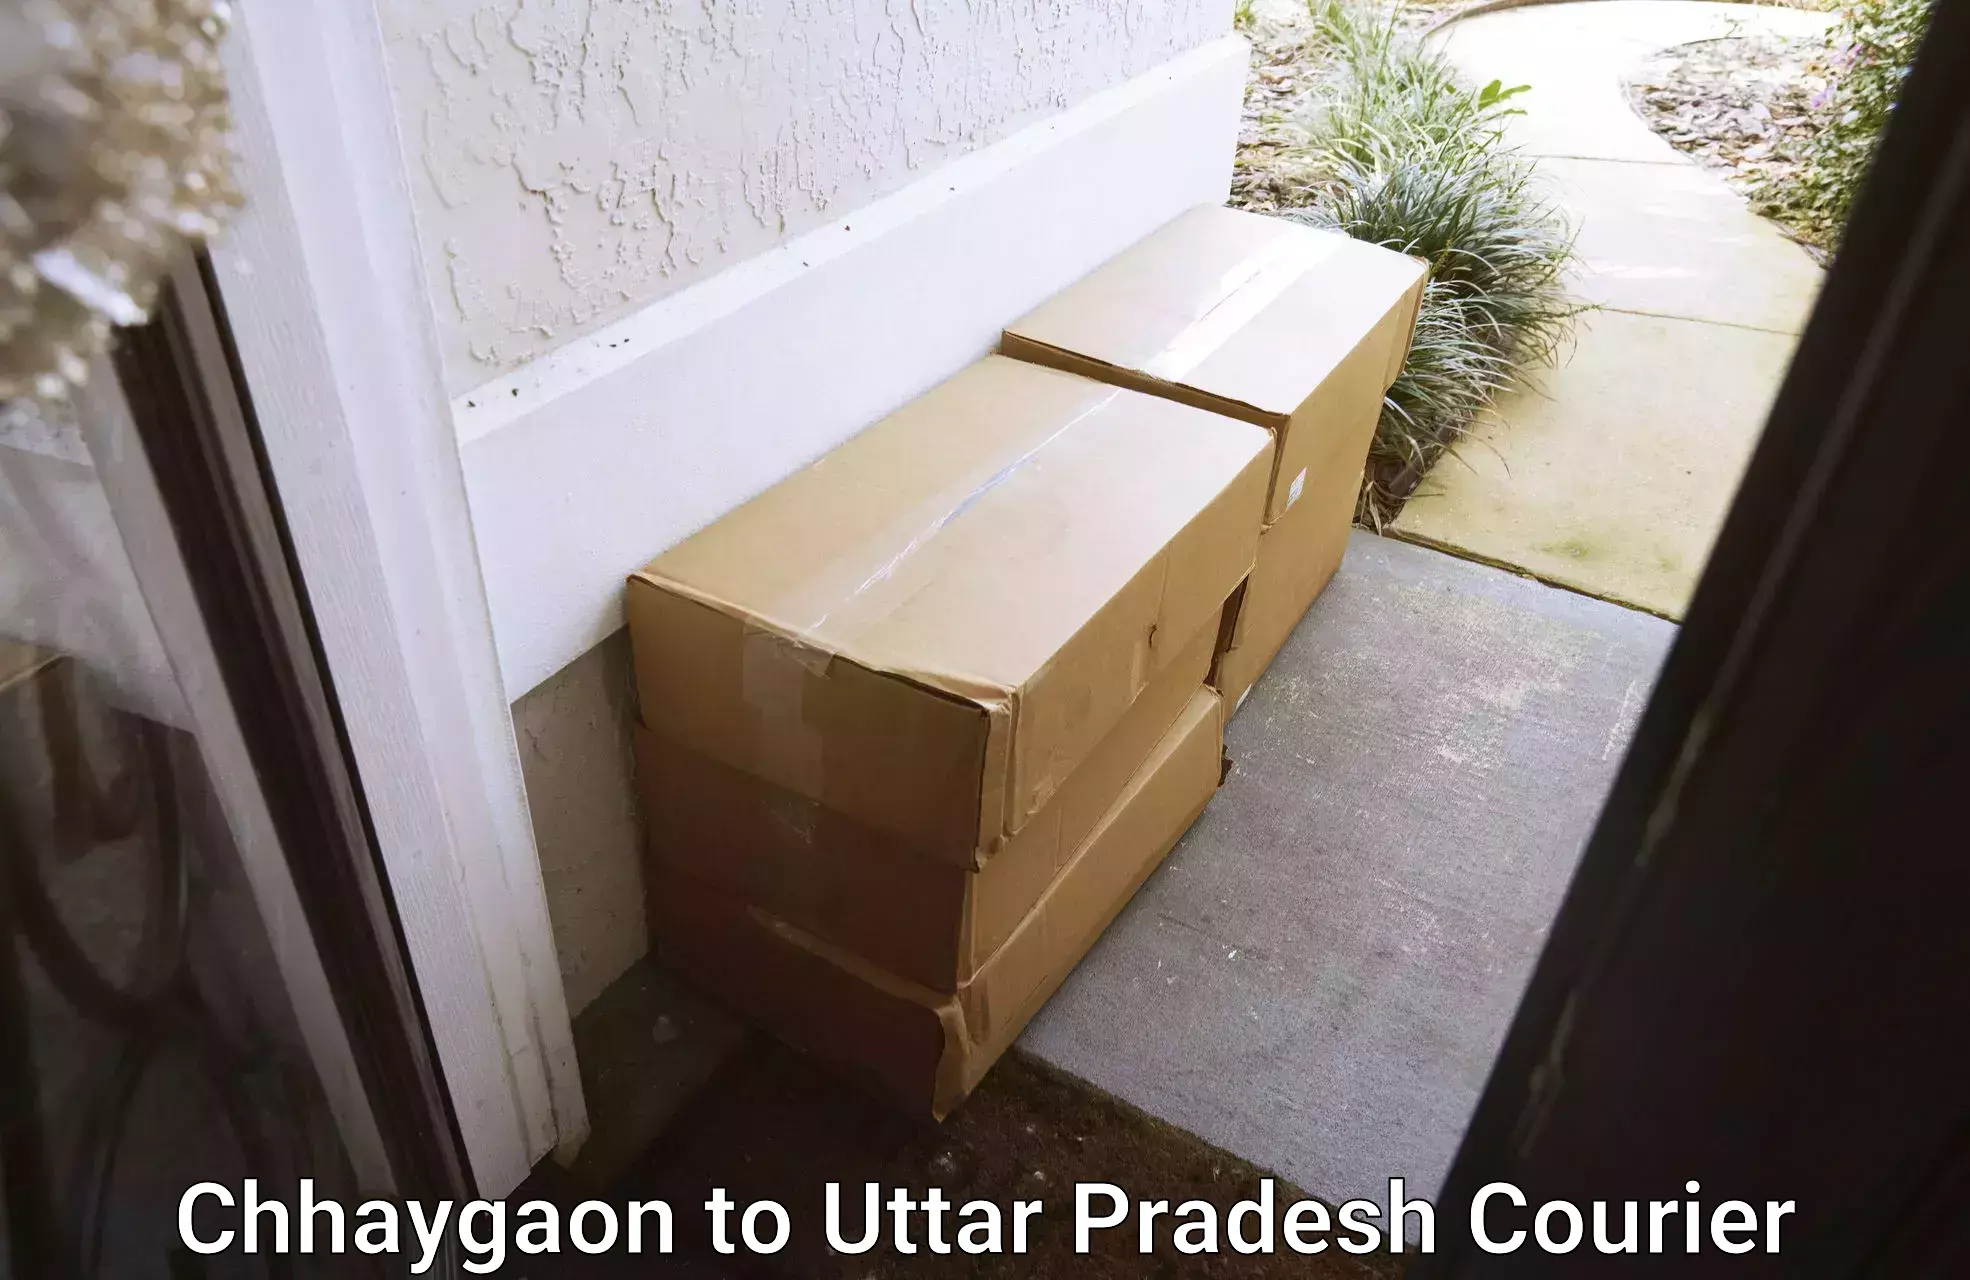 On-call courier service Chhaygaon to Uttar Pradesh